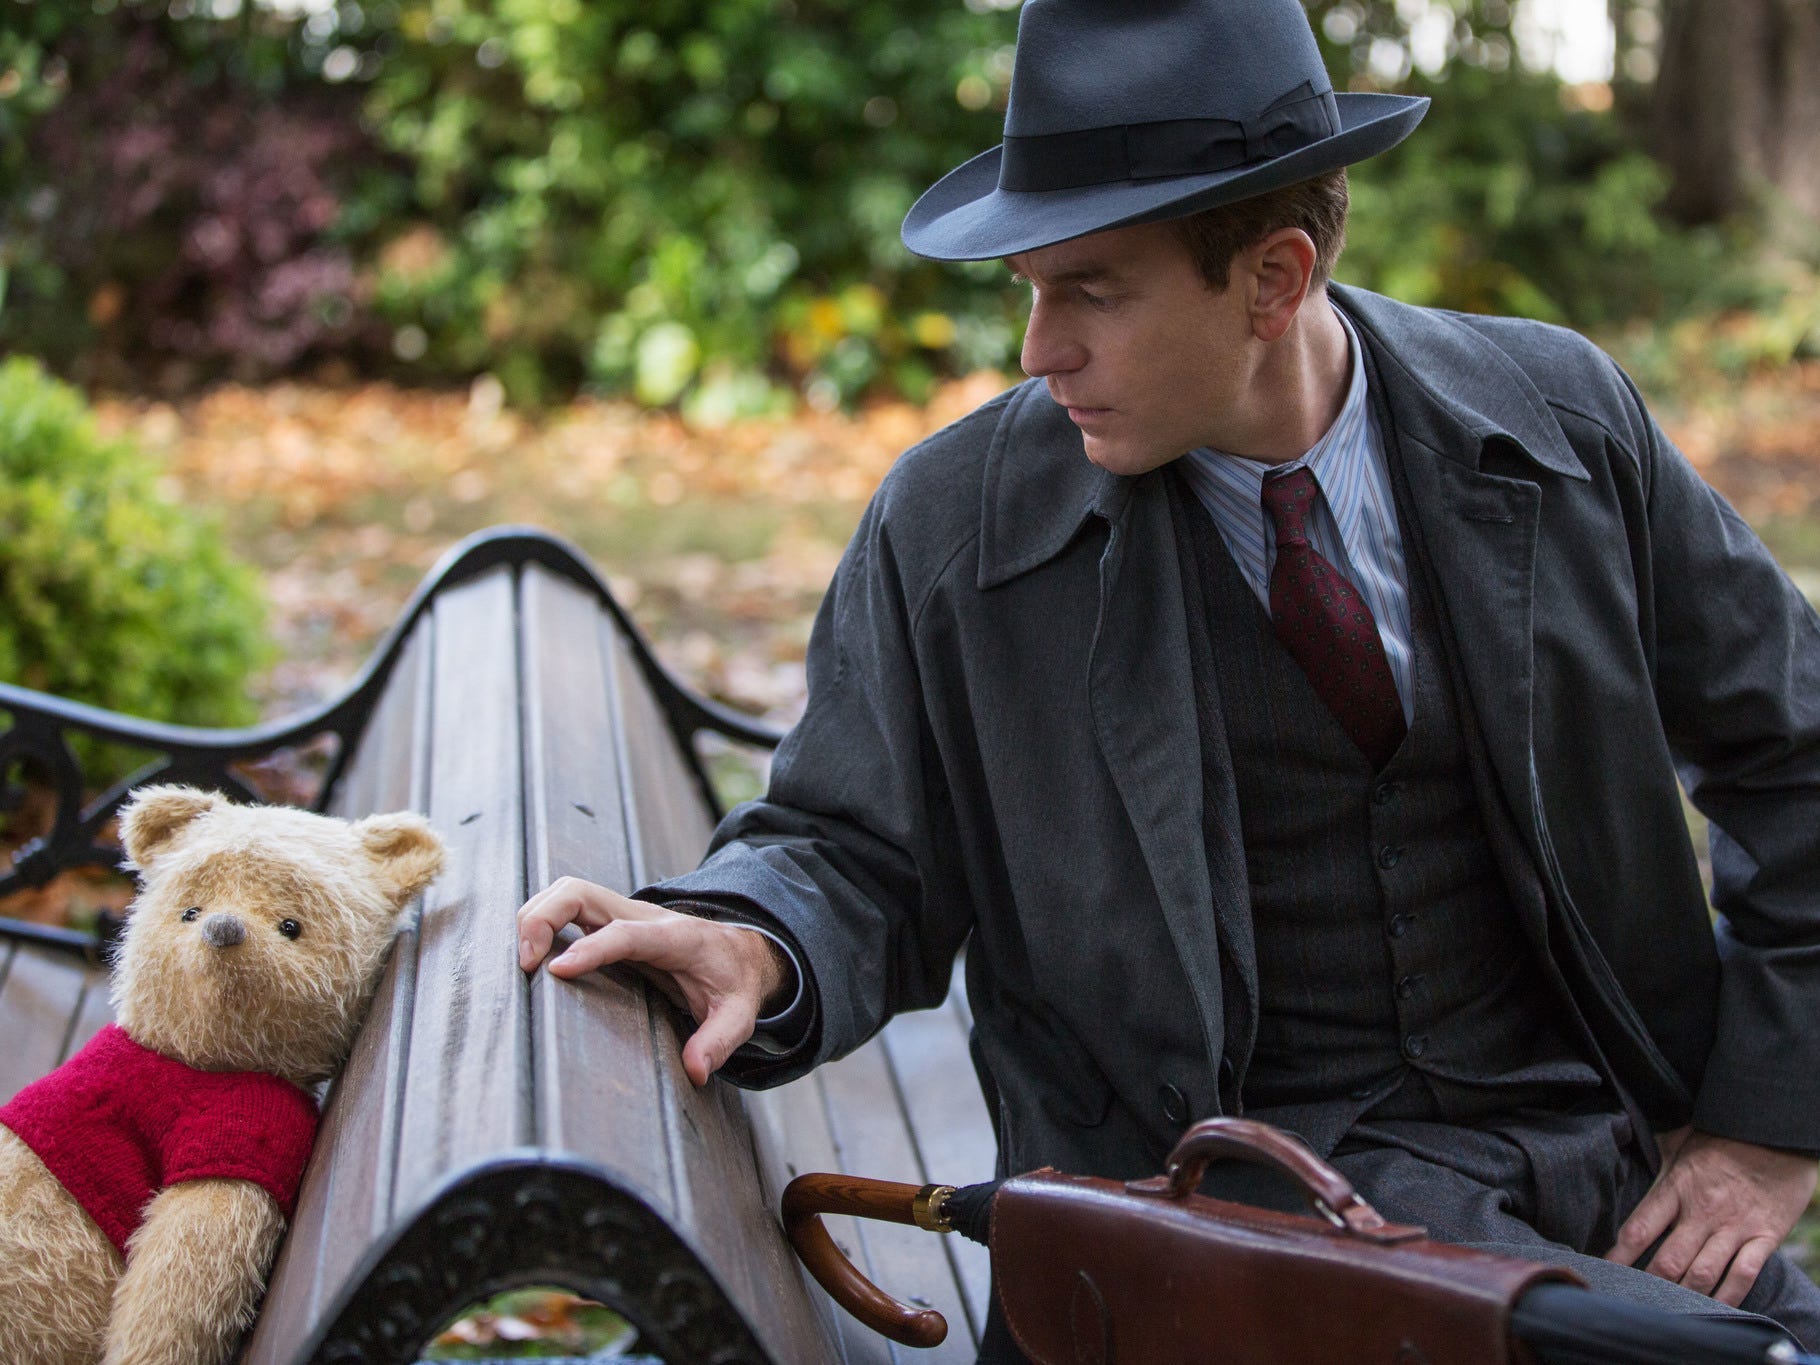 <p>Maybe we're cheating a little bit since 2018's "<a href="https://www.businessinsider.com/christopher-robin-review-it-will-make-you-cry-a-lot-2018-8">Christopher Robin</a>" isn't a specific remake of any "<a href="https://www.businessinsider.com/winnie-pooh-sketch-disney-milne-shepard-foyle-book-auction-original-2023-8">Winnie the Pooh</a>" film but instead, a semi-sequel that brings Pooh and friends out of the Hundred Acre Wood into the real world, but this movie is too good to leave out.</p><p>In it, Ewan McGregor plays a grown-up Christopher Robin who has left his friends Pooh, Tigger, Eeyore, Piglet, Rabbit, Kanga, Roo, and Owl behind. By chance, he reunites with them and is reminded of the important things in life.</p><p>It is always a joy to hang out with Winnie the Pooh, and a disillusioned adult returning to their fun-loving ways is a story Disney does so well, like in "Mary Poppins."</p><p>Additionally, the score for this movie rocks. It's so perfectly paired with the film.</p>